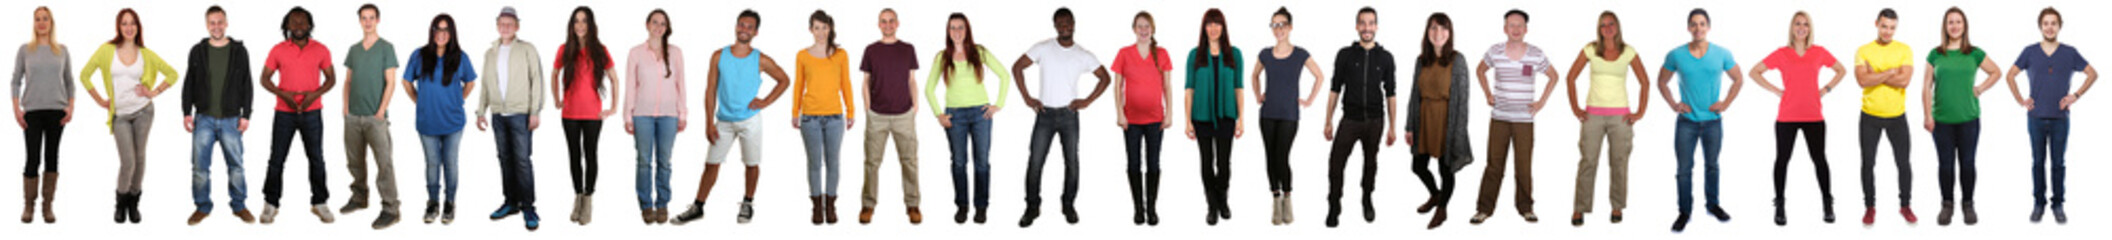 Large group of young people smiling happy multicultural multi ethnic full body standing in a row